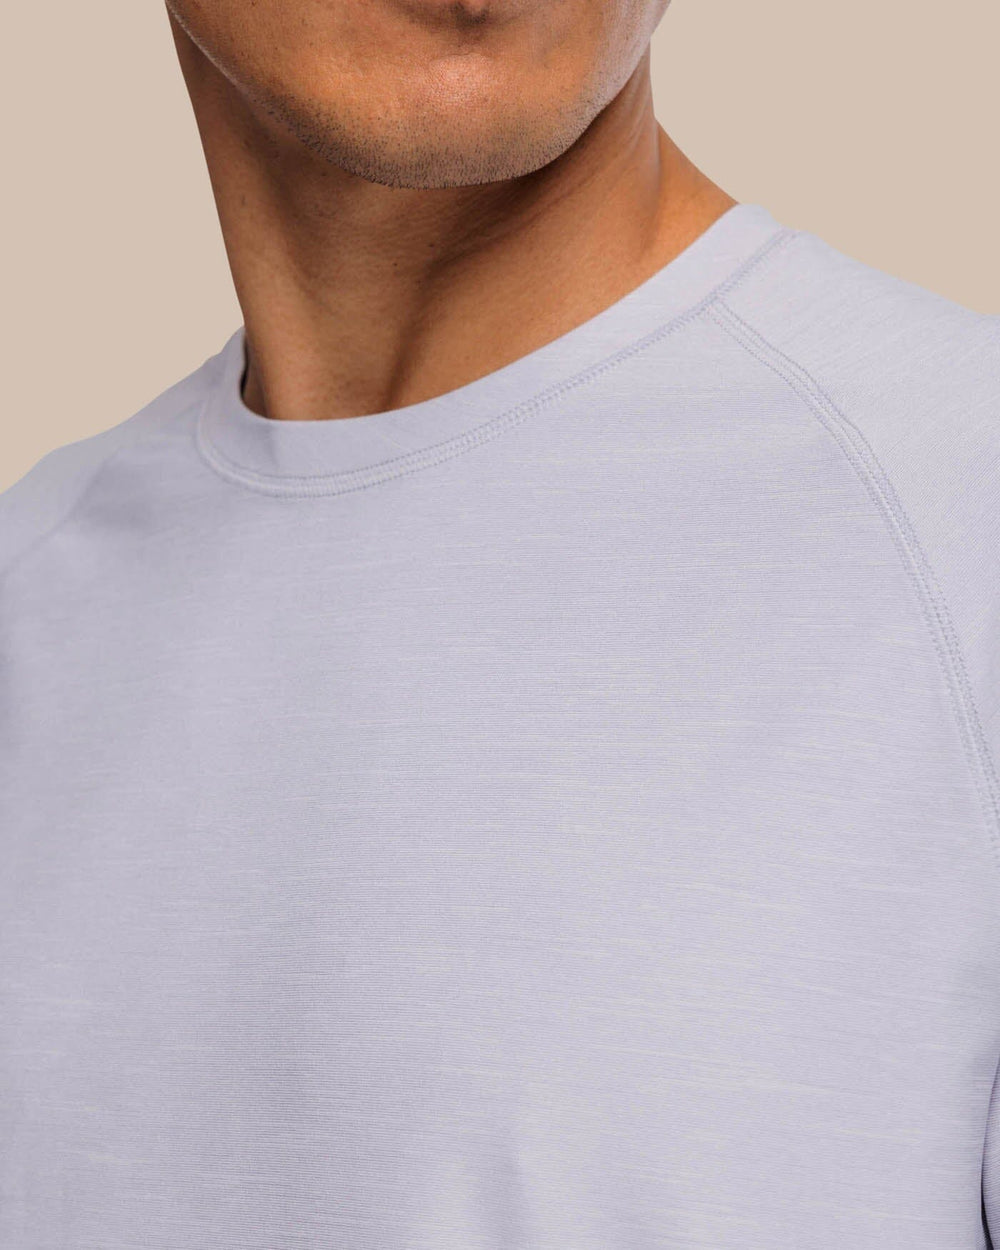 The detail view of the Southern Tide brrr-illiant Performance Long Sleeve Tee by Southern Tide - Platinum Grey